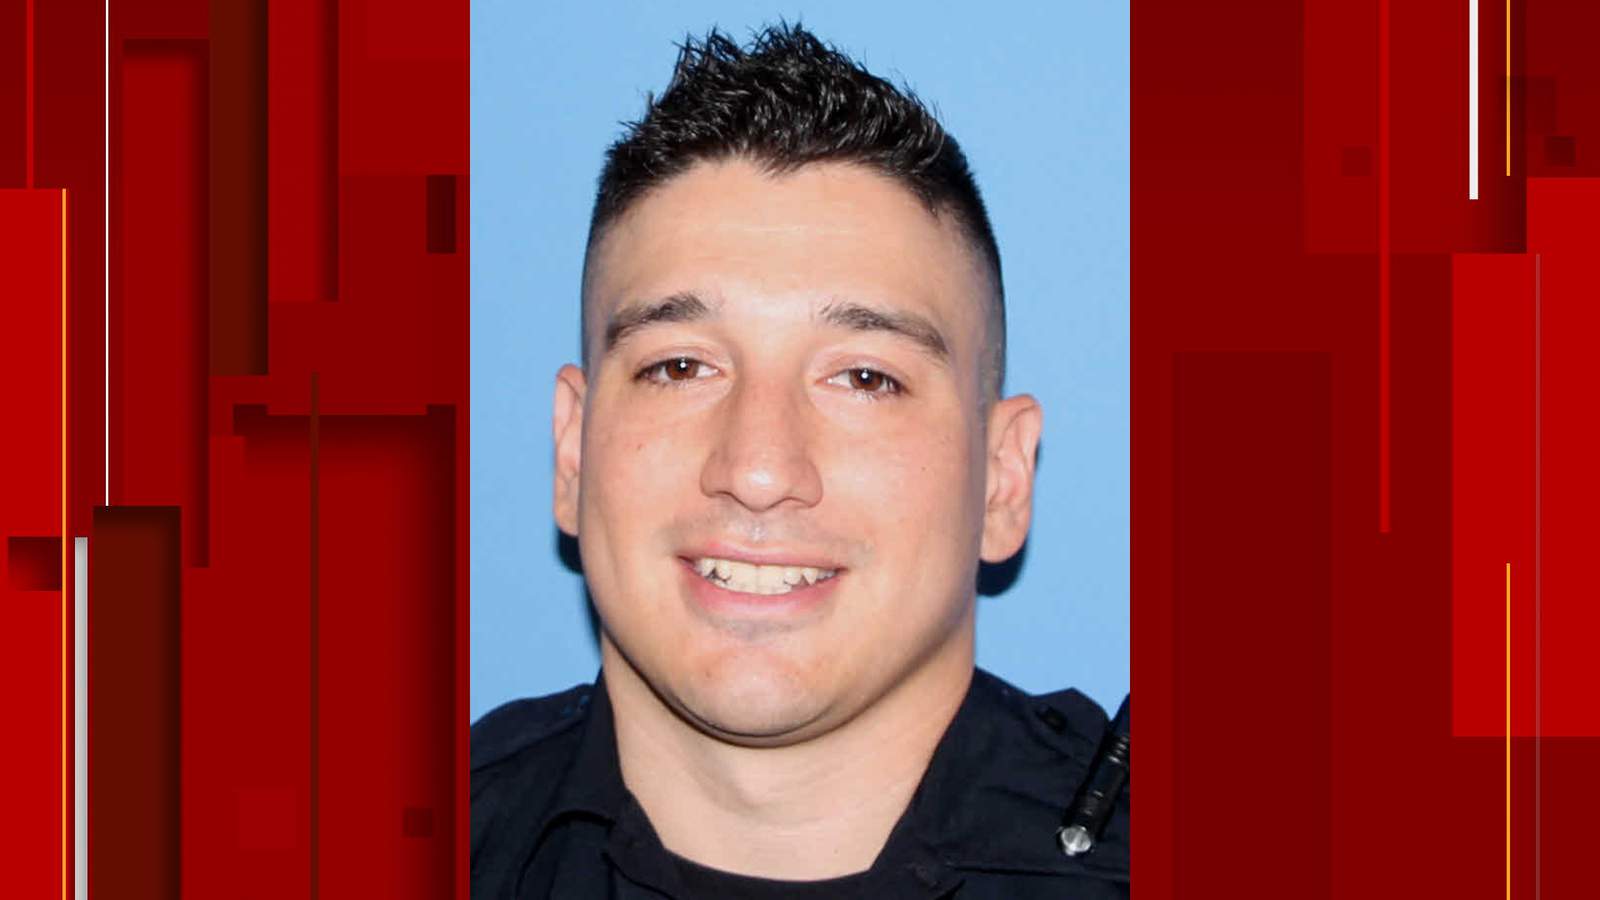 San Antonio police officer fired after kneeling on suspects neck: records